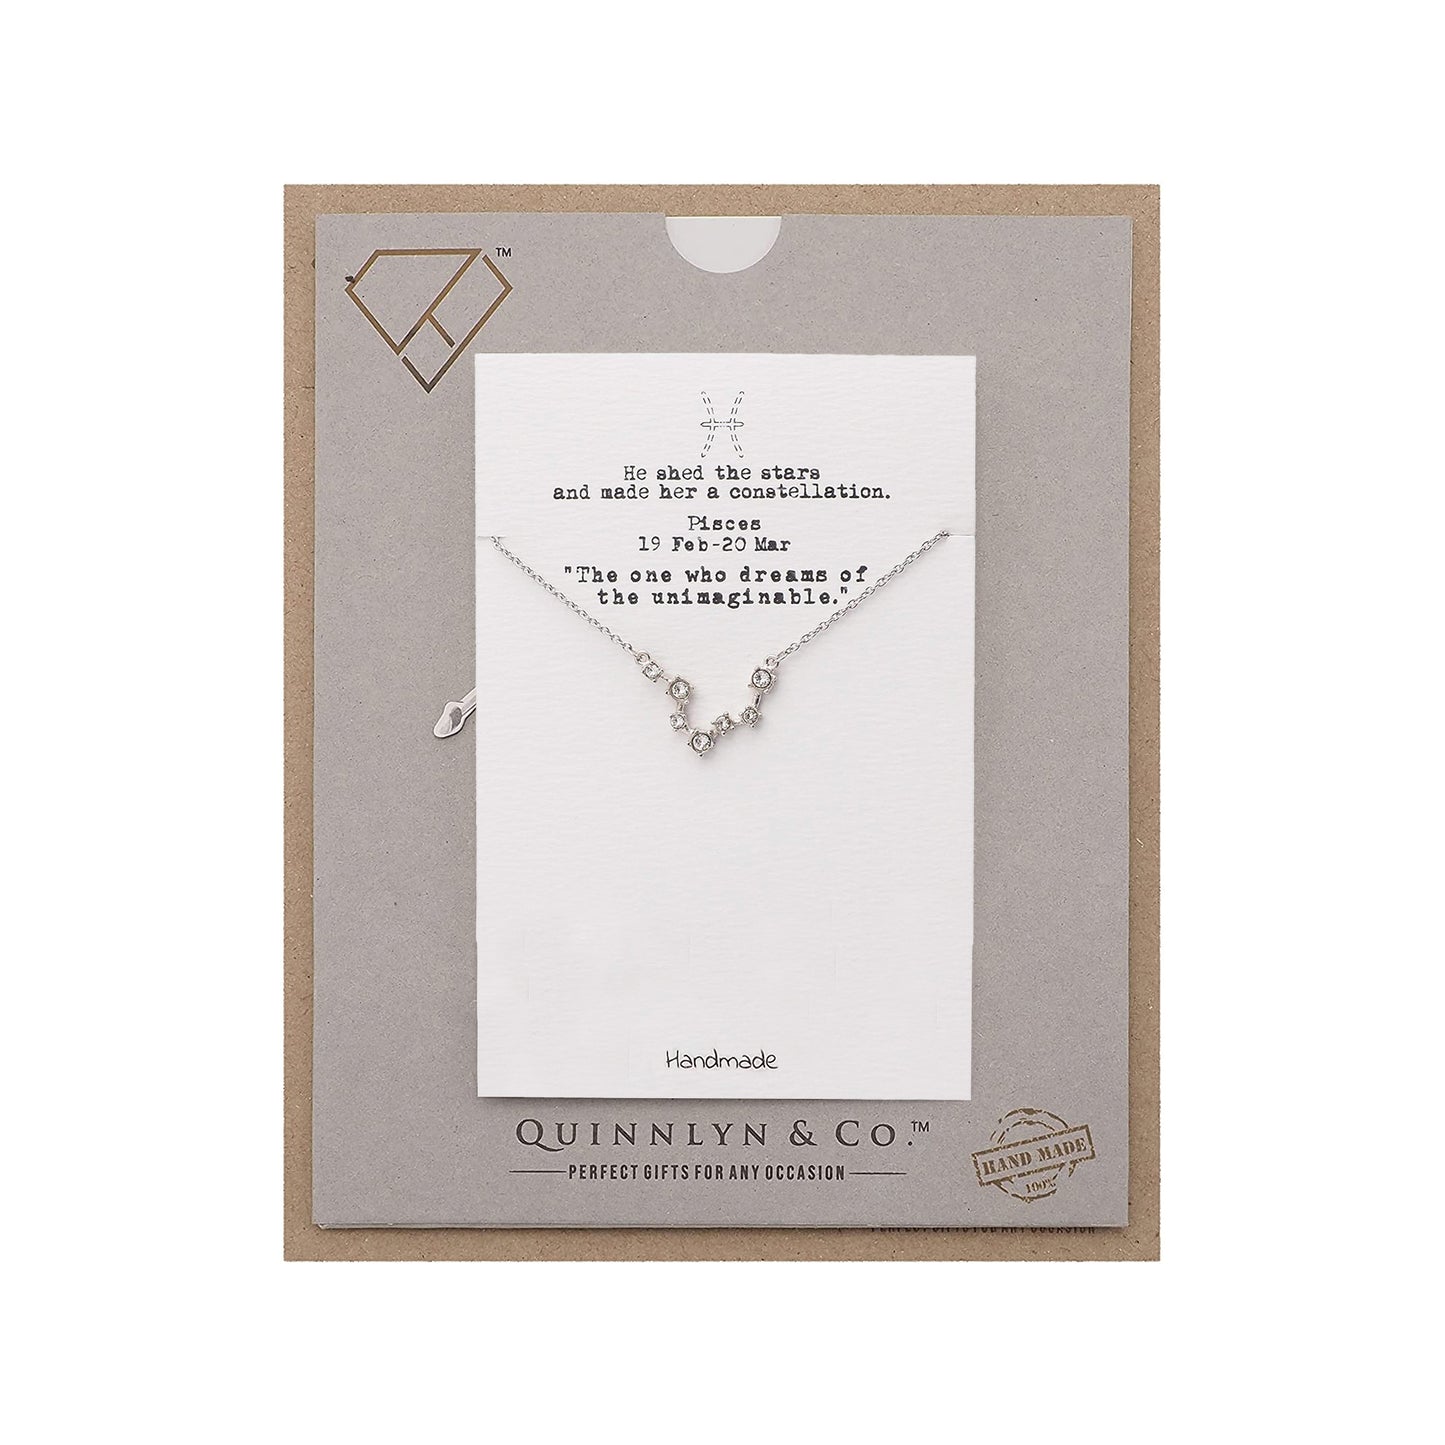 Quinnlyn & Co. Pisces Zodiac Pattern Swarovzki Pendant Necklace, Birthday Gifts for Women, Teens and Girls with Inspirational Greeting Card